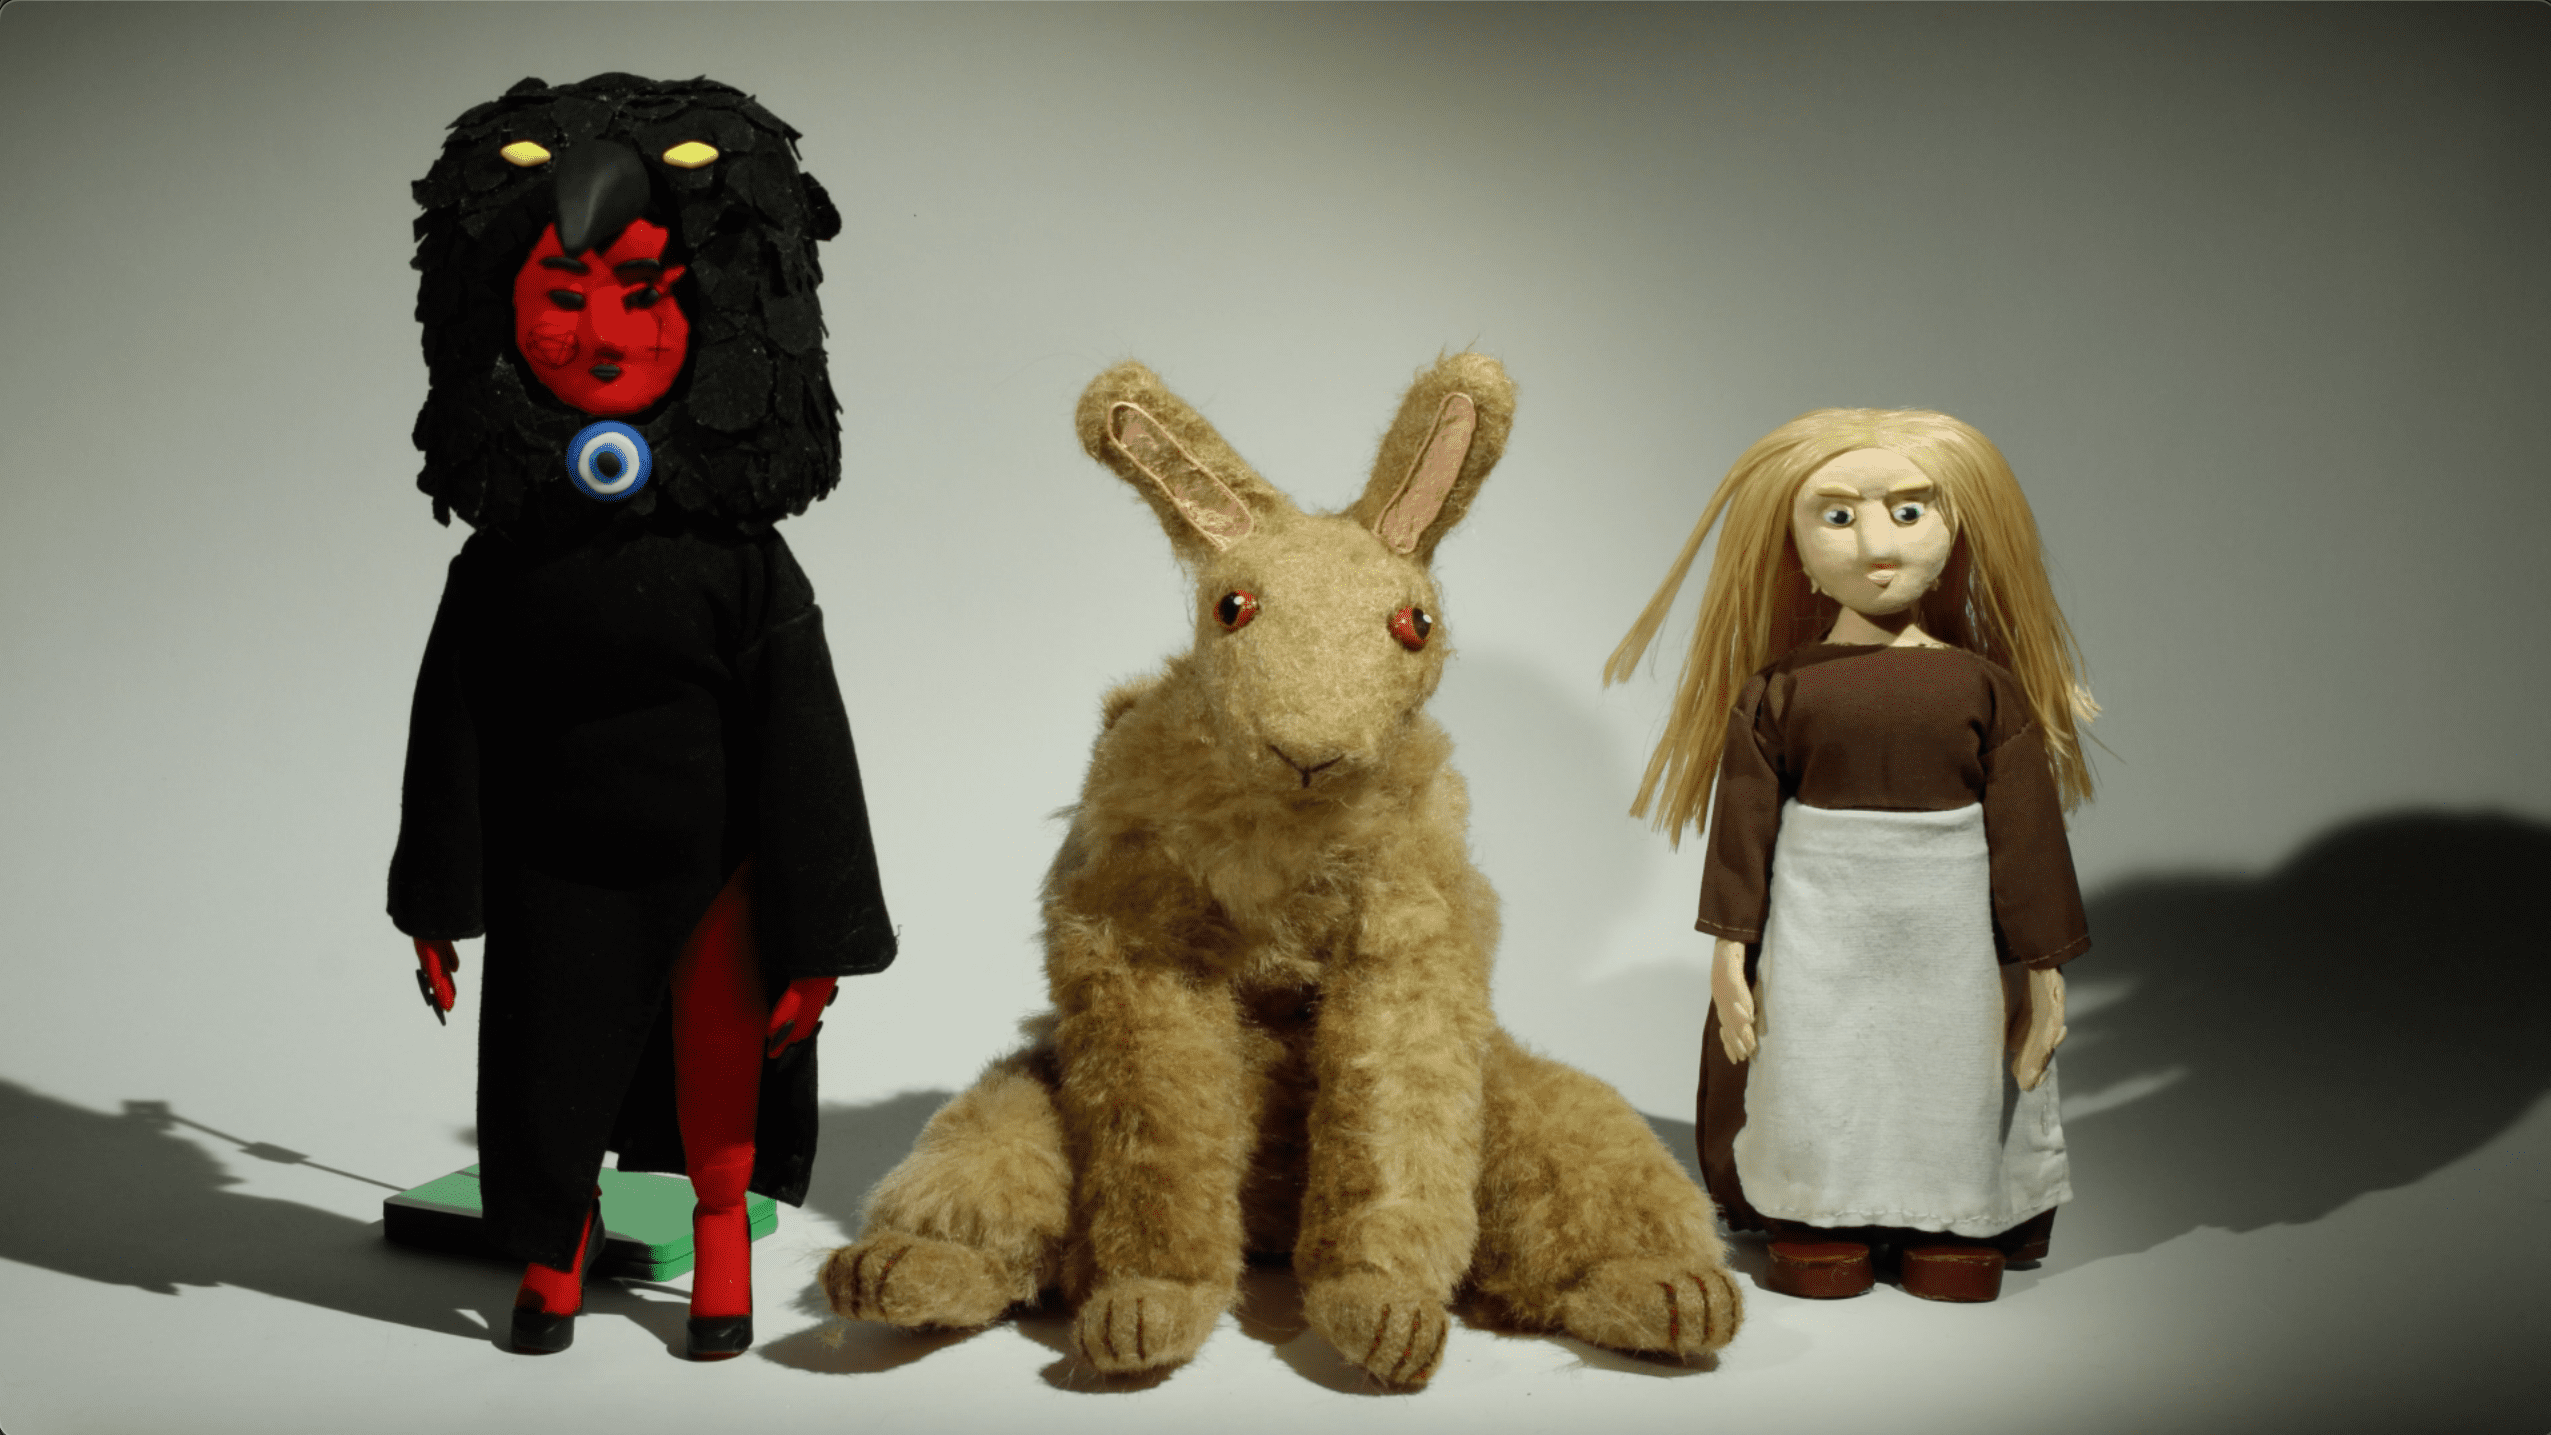 Puppet fabrication work by Emilie Perkins showcasing three stop motion puppets.